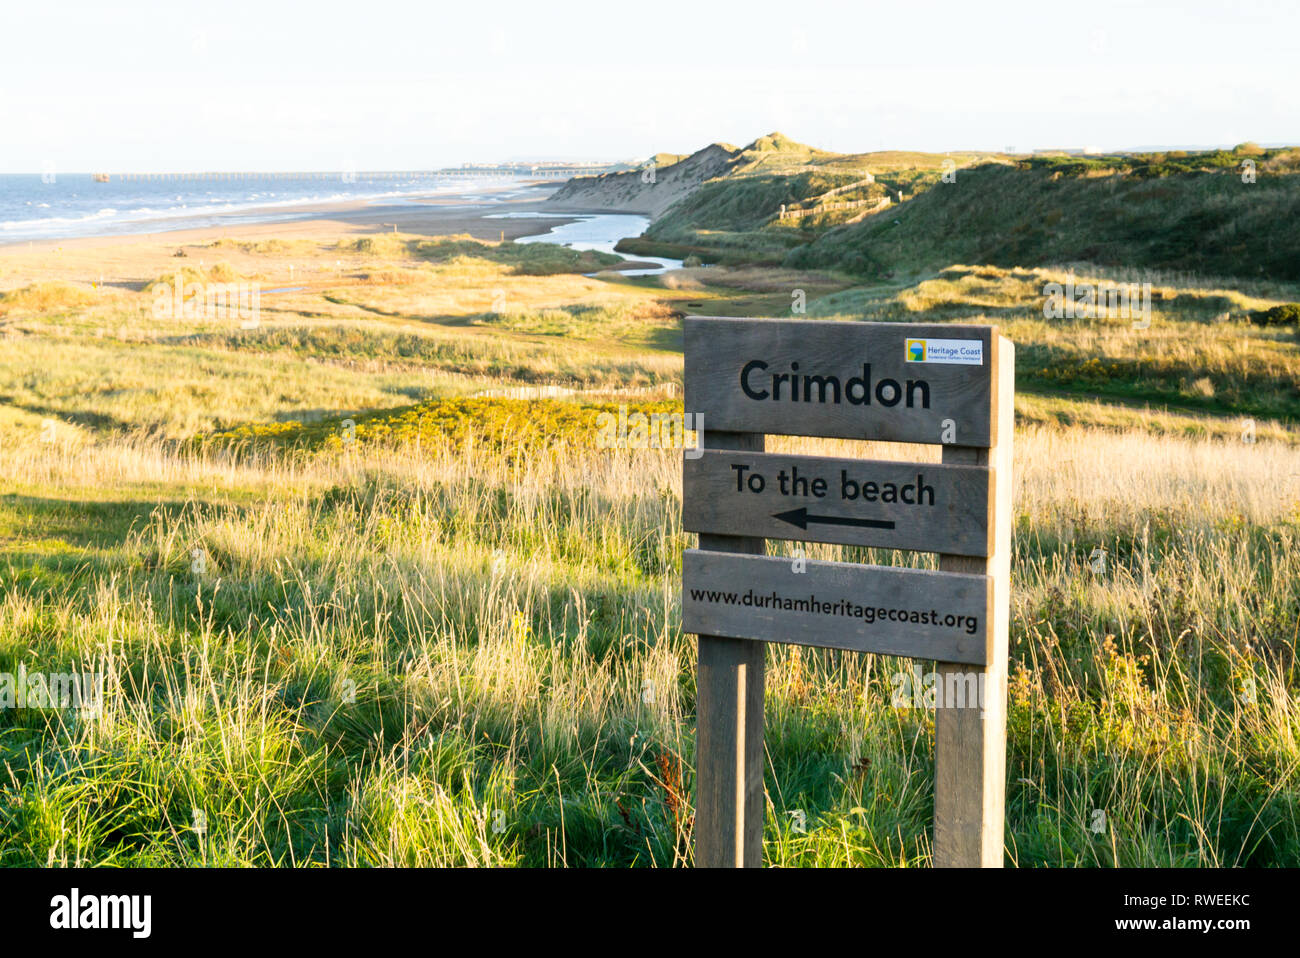 A View of the Coastline at Crimdon Dene with a Signpost for Crimdon Beach Stock Photo